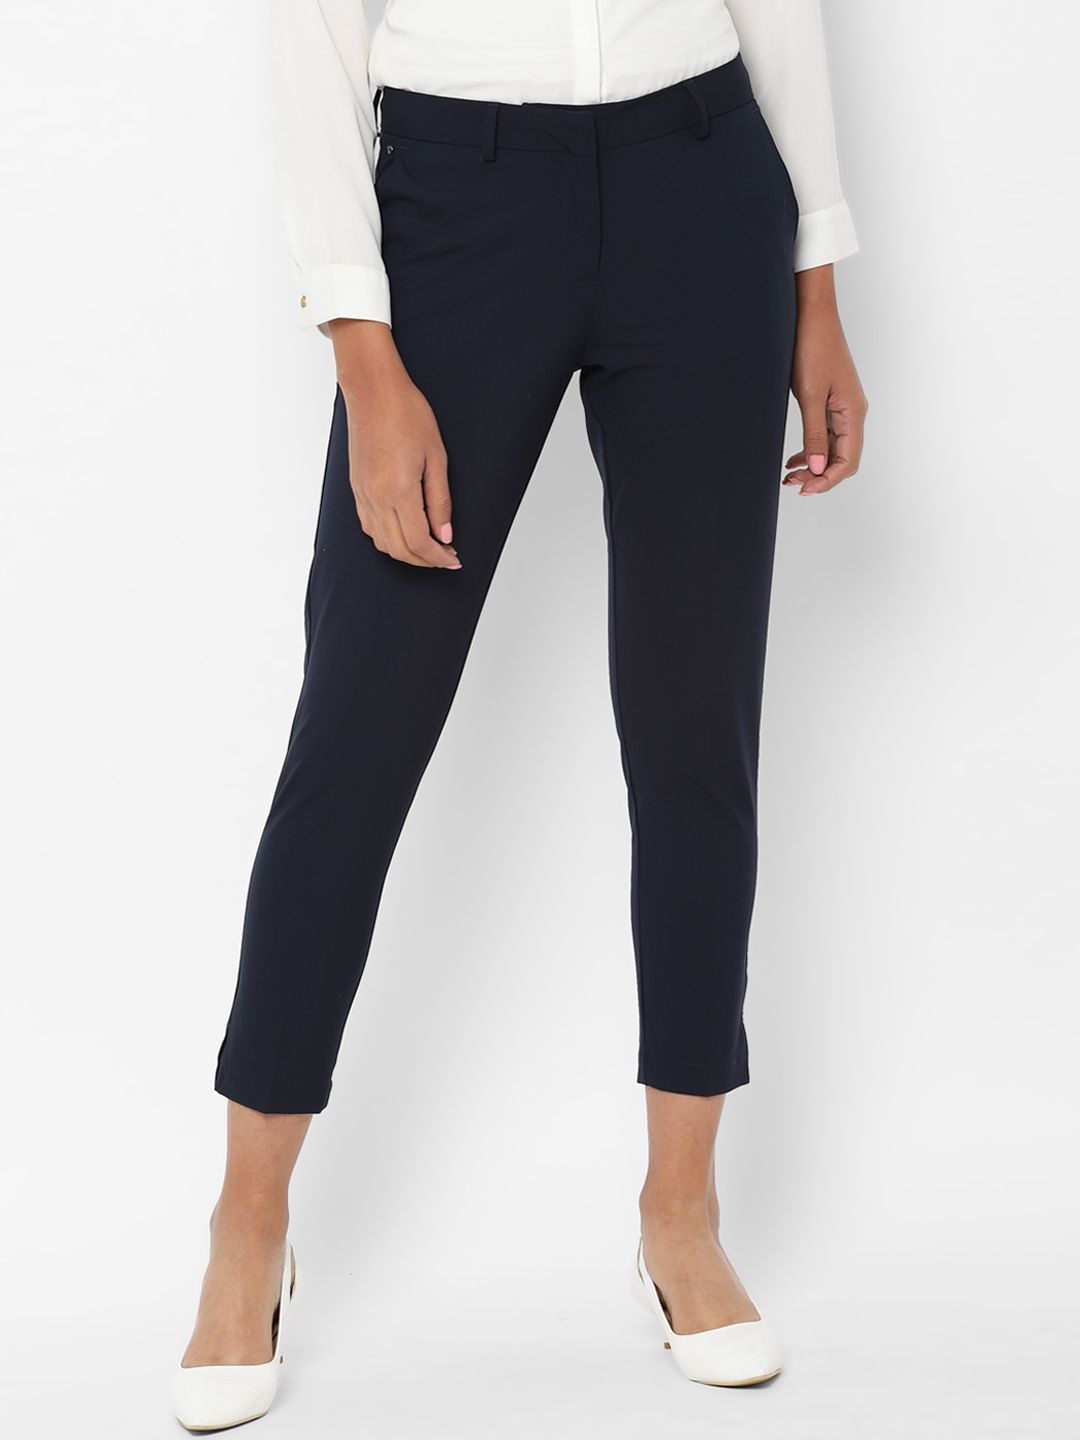 Allen Solly Woman Women Navy Blue Regular Fit Solid Formal Trousers Price in India